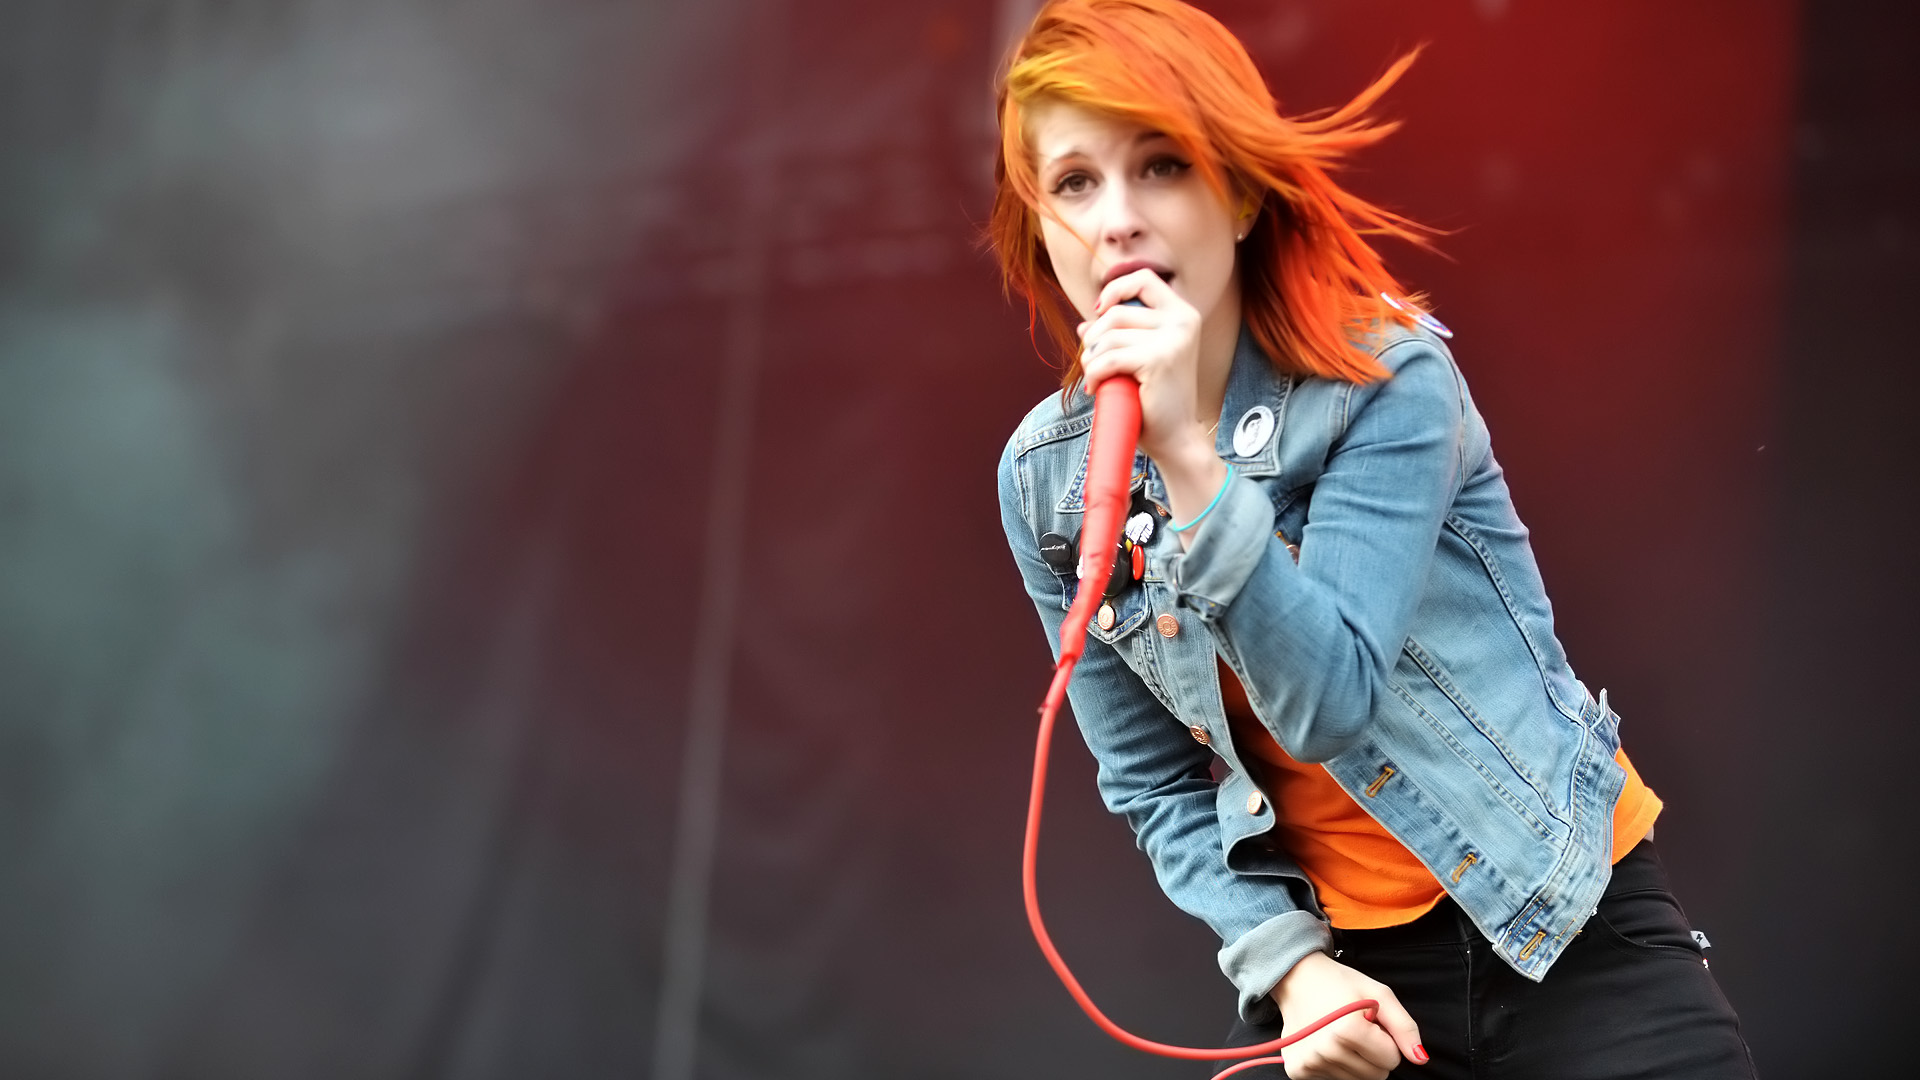 Hayley Williams' Blue Hair: The Evolution of Her Colorful Personality - wide 6